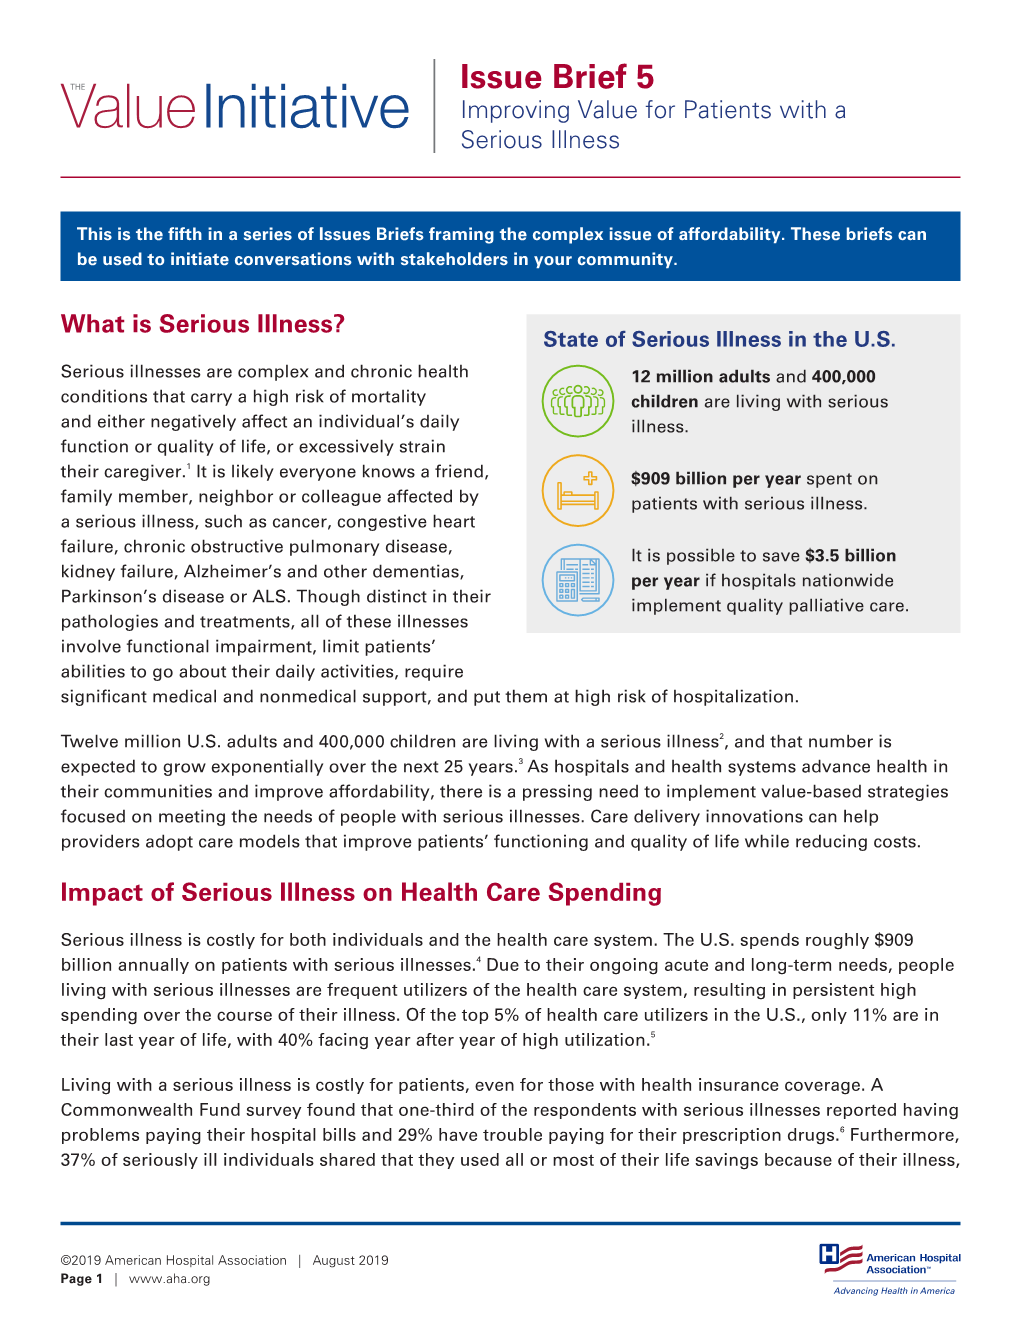 The Value Initiative Issue Brief 5: Improving Value for Patients with a Serious Illness